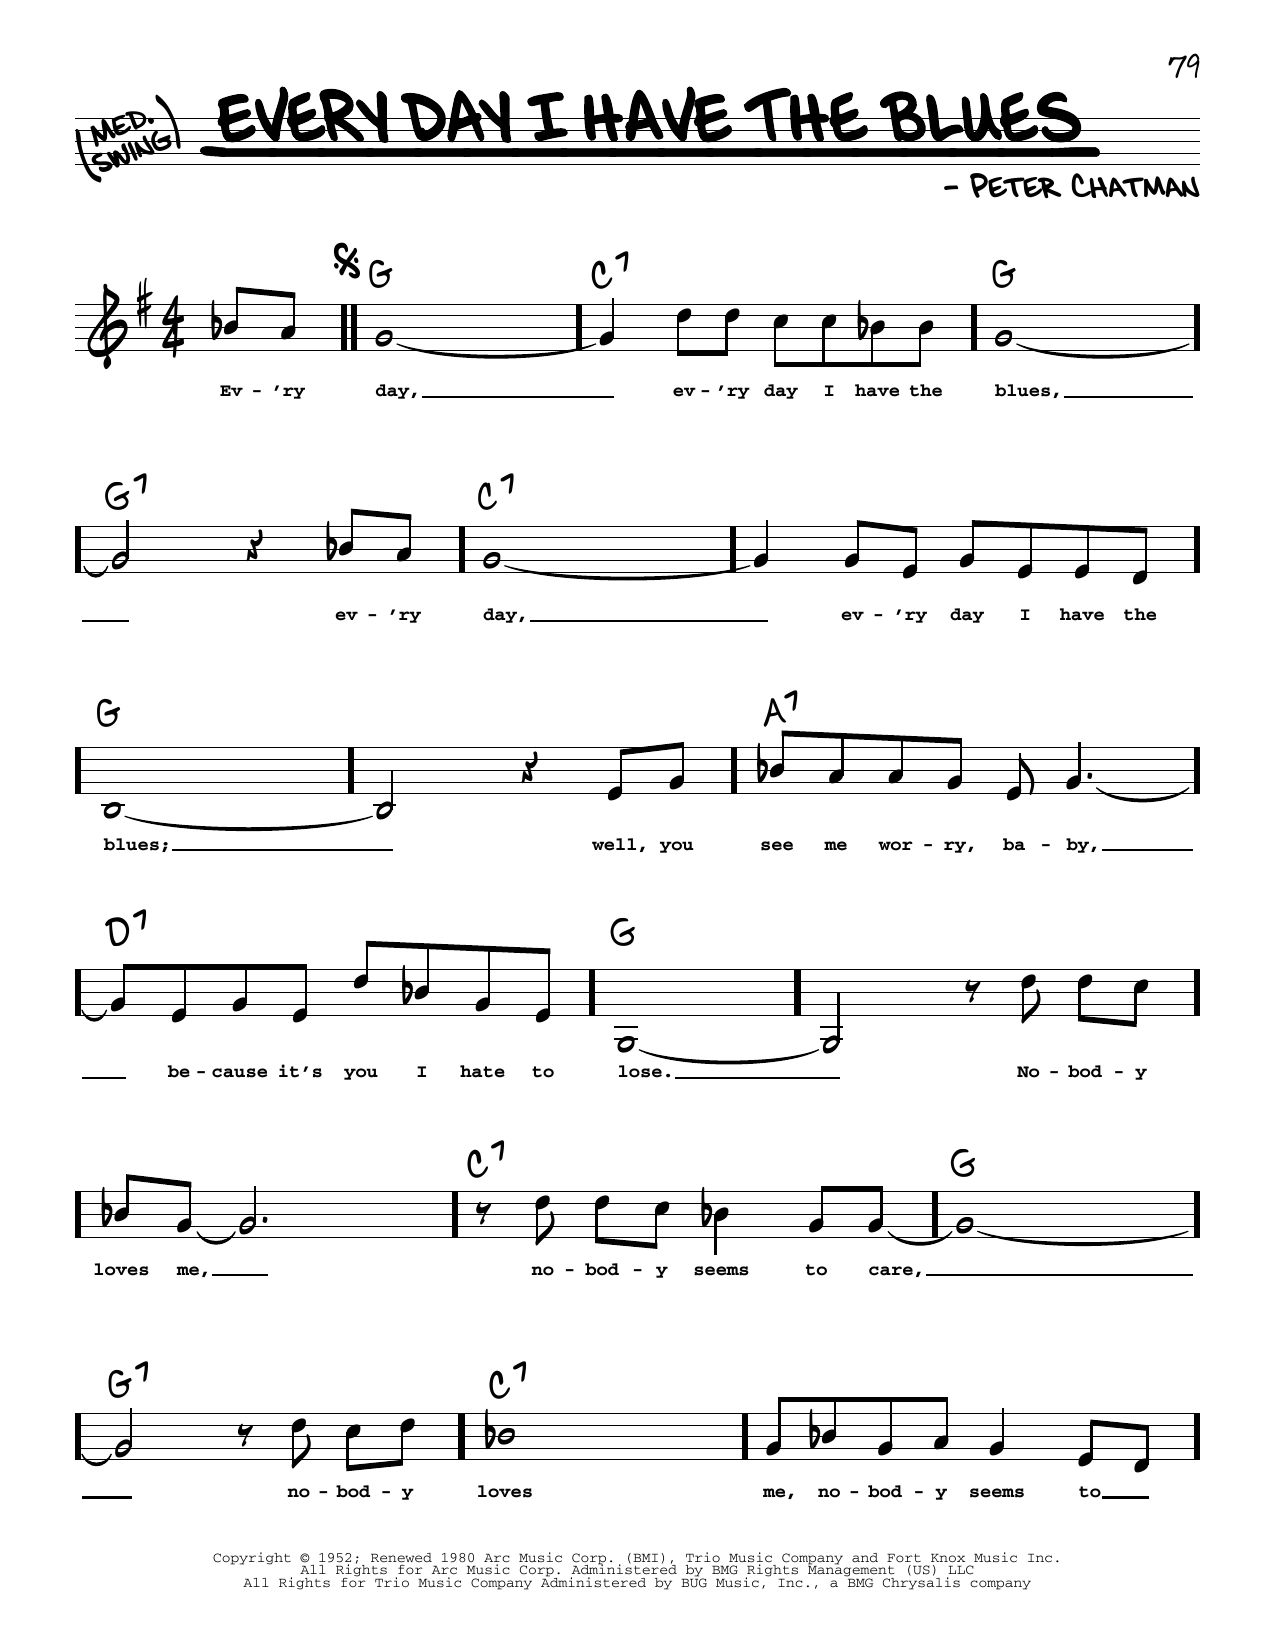 B.B. King Every Day I Have The Blues (Low Voice) sheet music notes printable PDF score